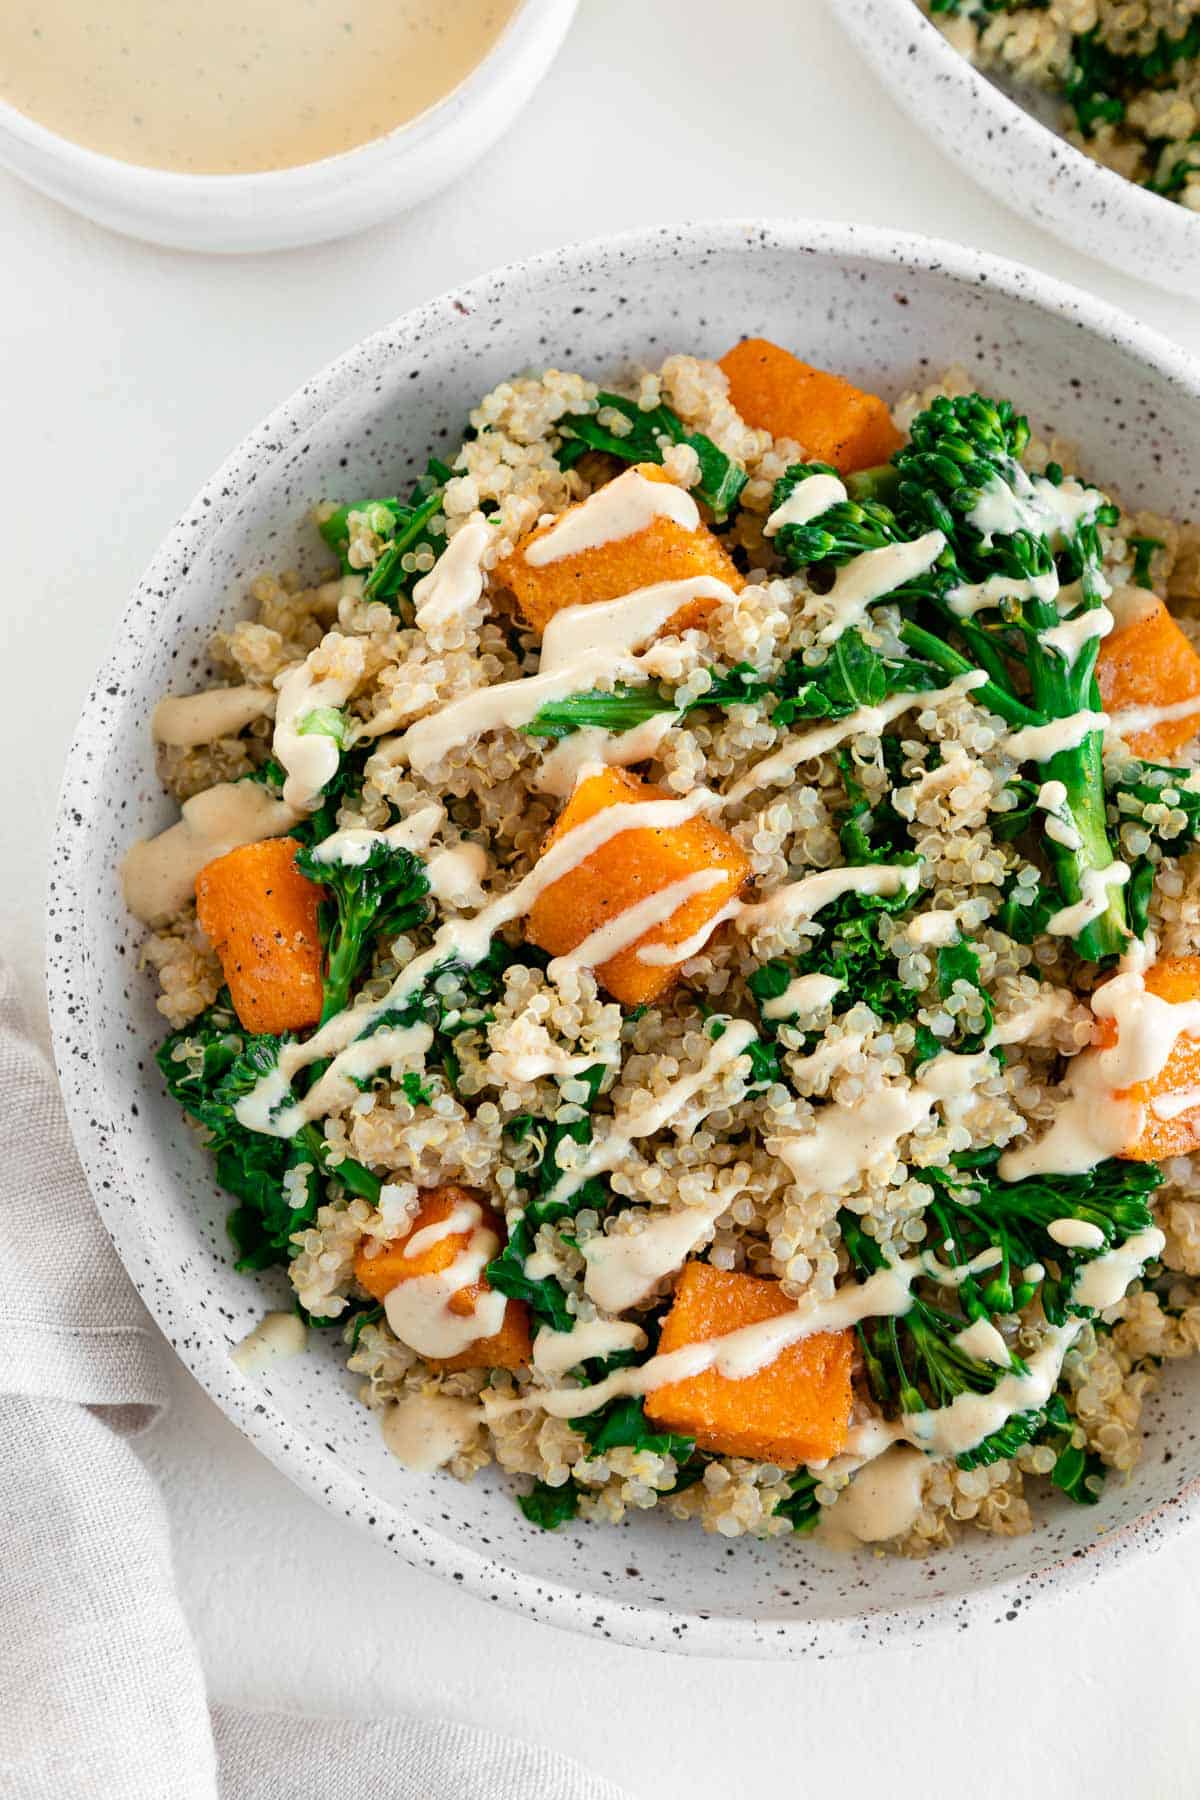 a butternut squash quinoa bowl with kale and broccoli, placed inside a ceramic dish beside a bowl of cashew cream